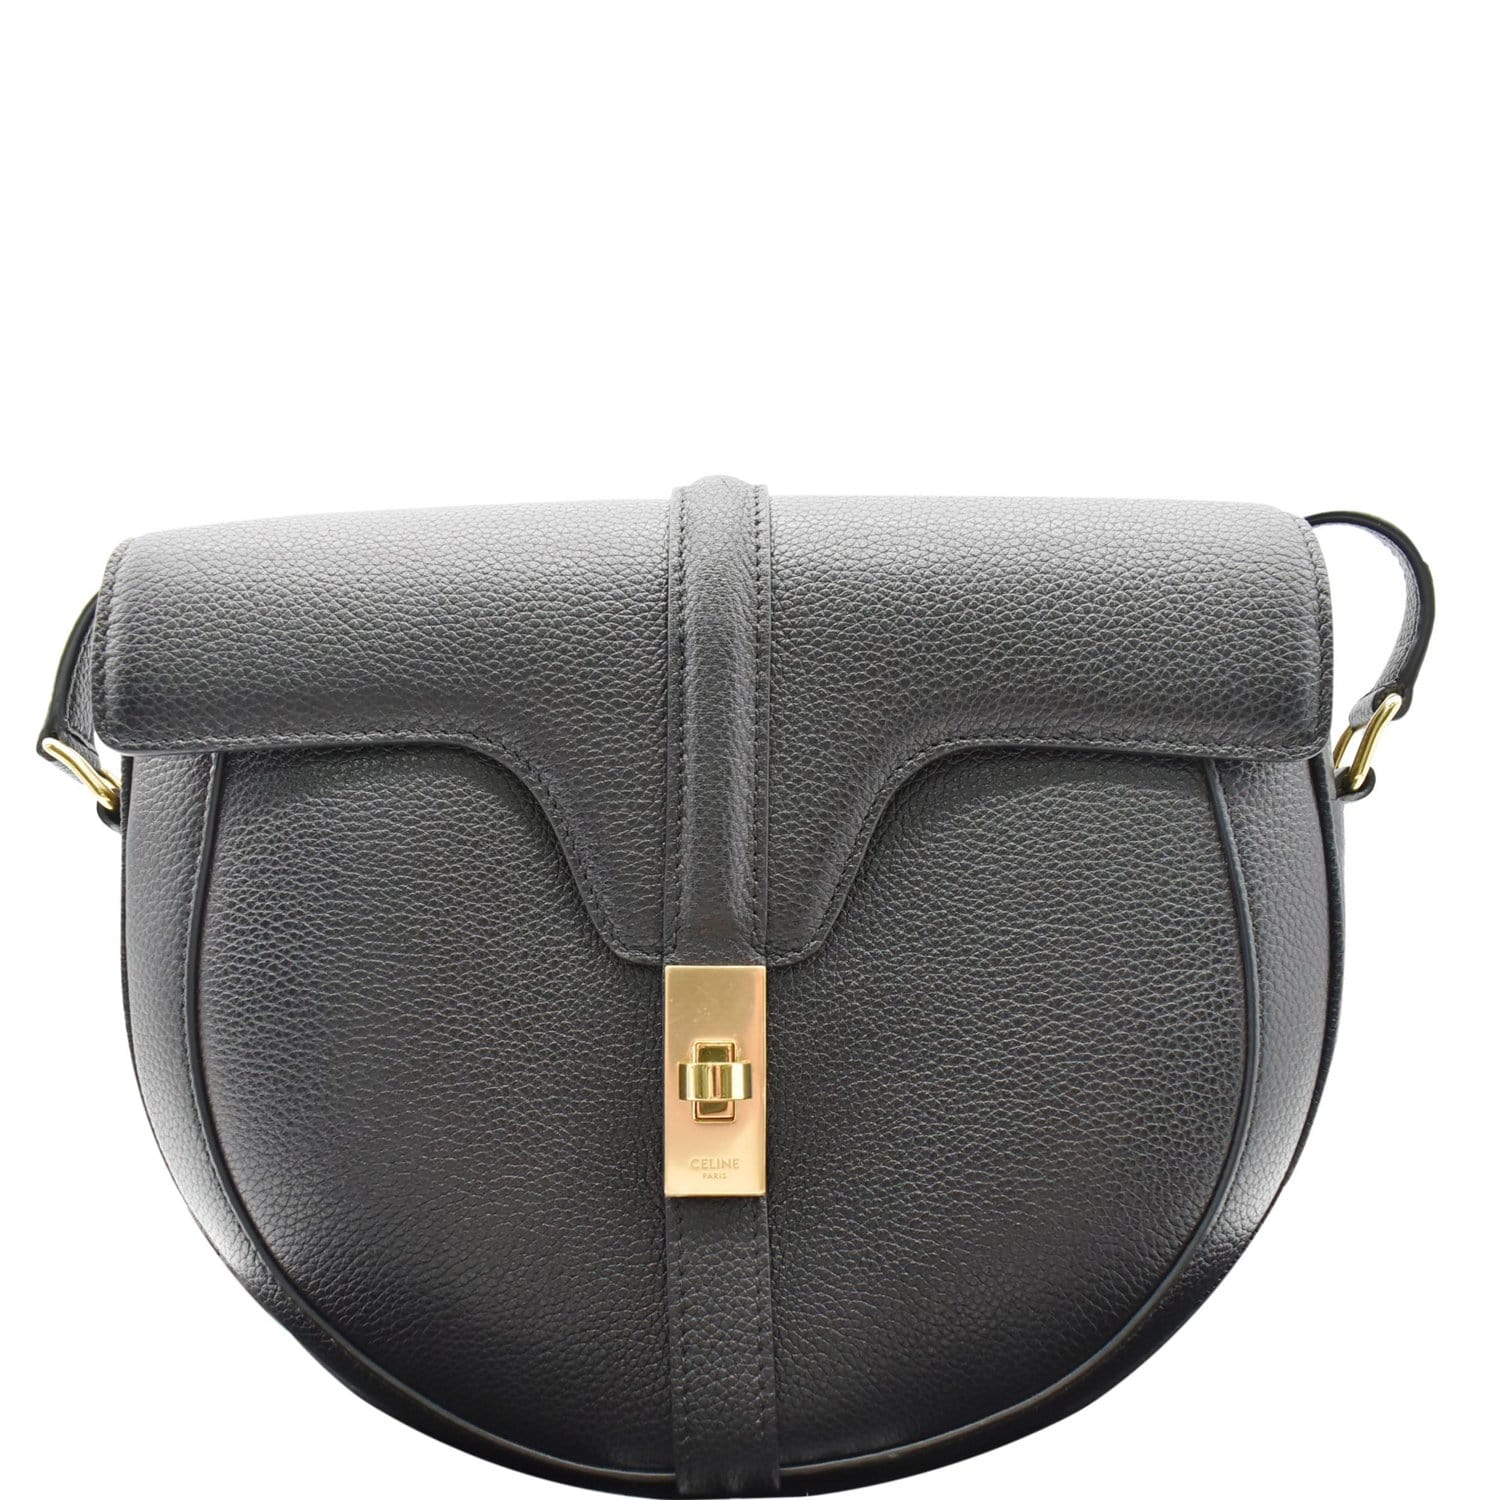 Celine SMALL BESACE 16 BAG IN SATINATED CALFSKIN Grey